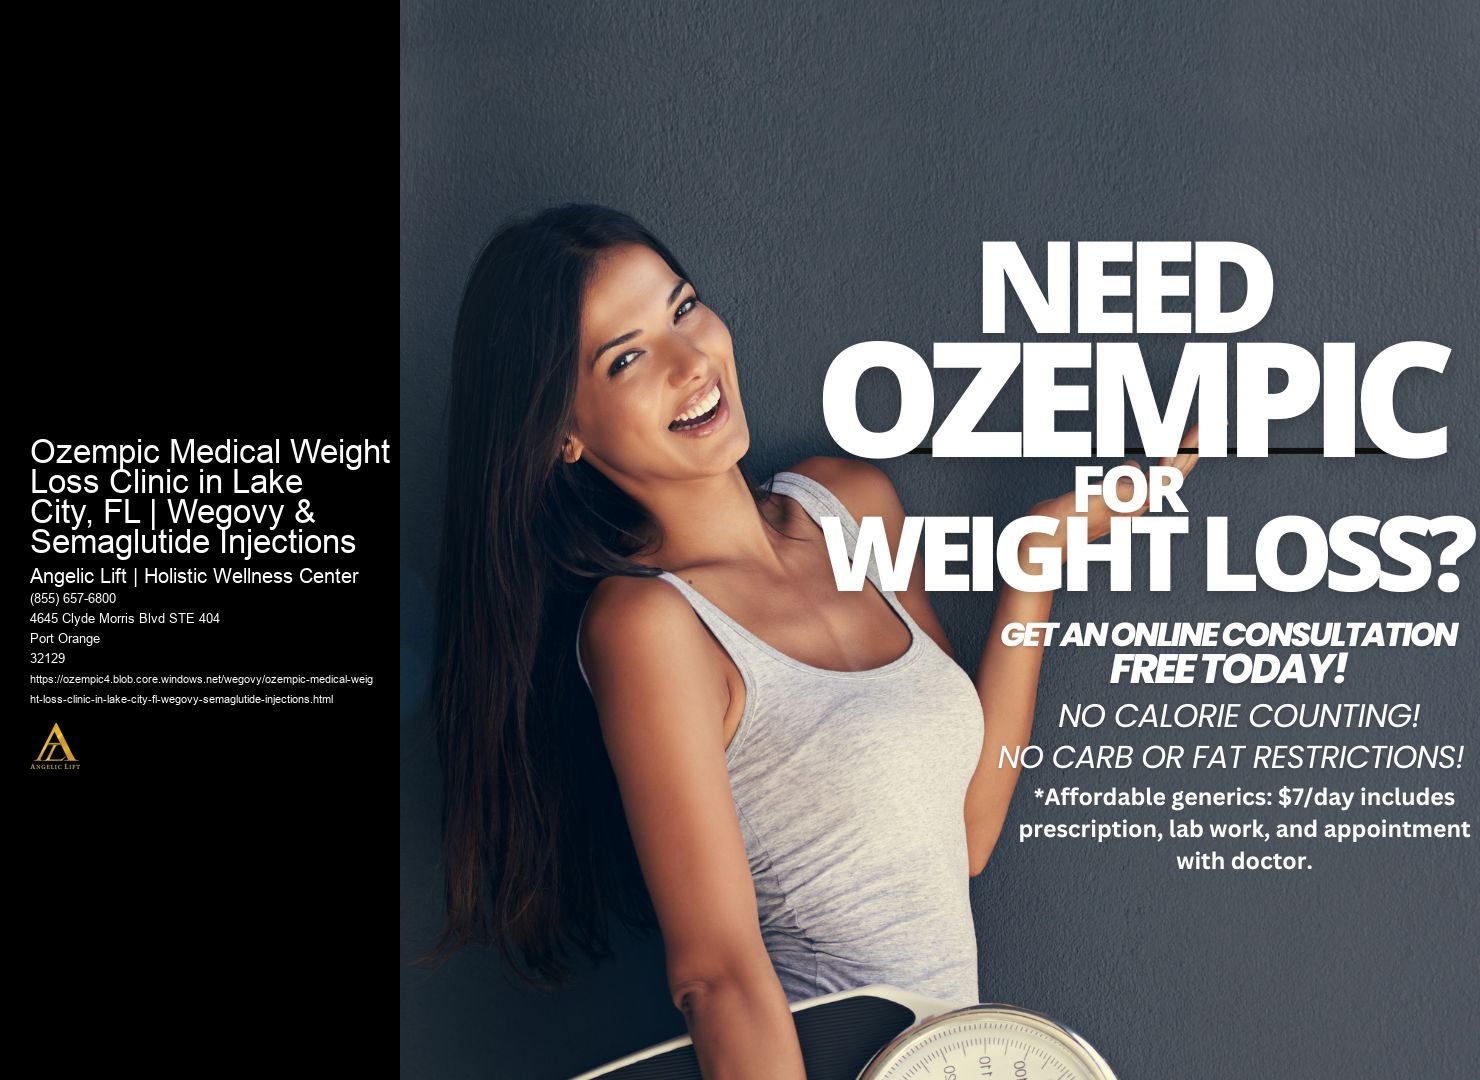 Ozempic Medical Weight Loss Clinic in Lake City, FL | Wegovy & Semaglutide Injections